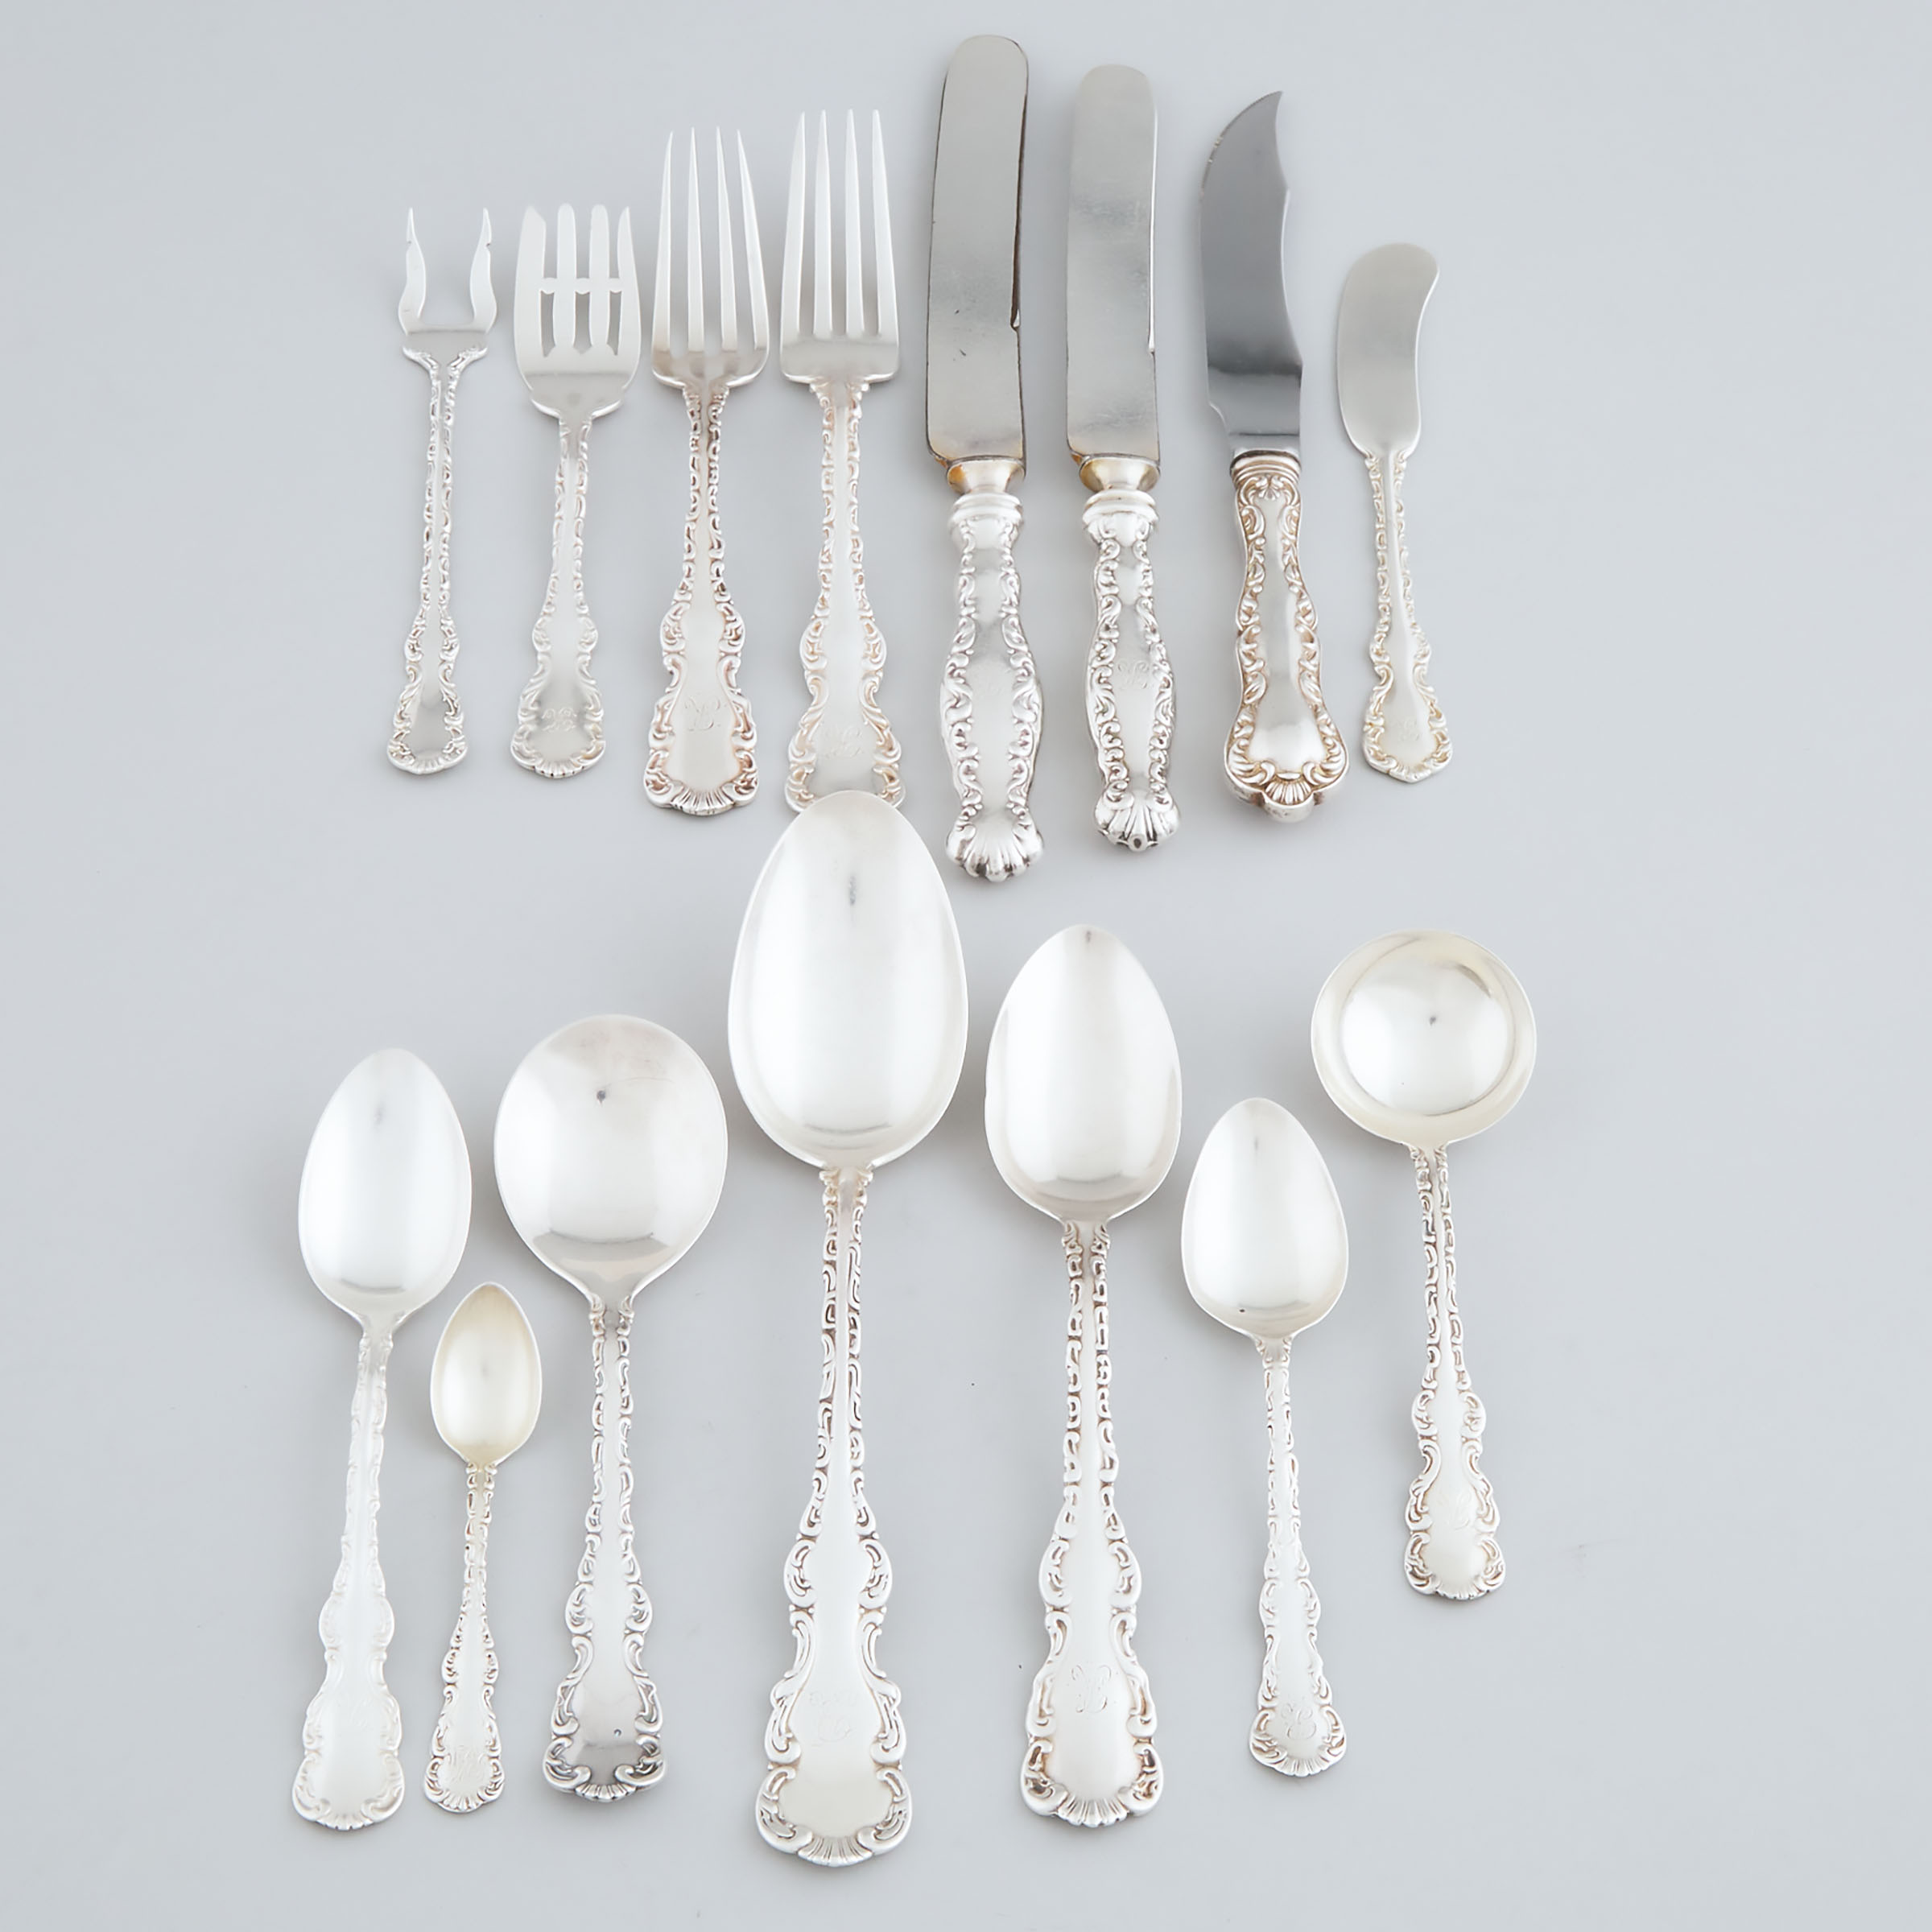 Canadian Silver 'Louis XV' Pattern Assembled Flatware Service, mainly J.E. Ellis & Co. and Roden Bros., Toronto, Ont., 20th century